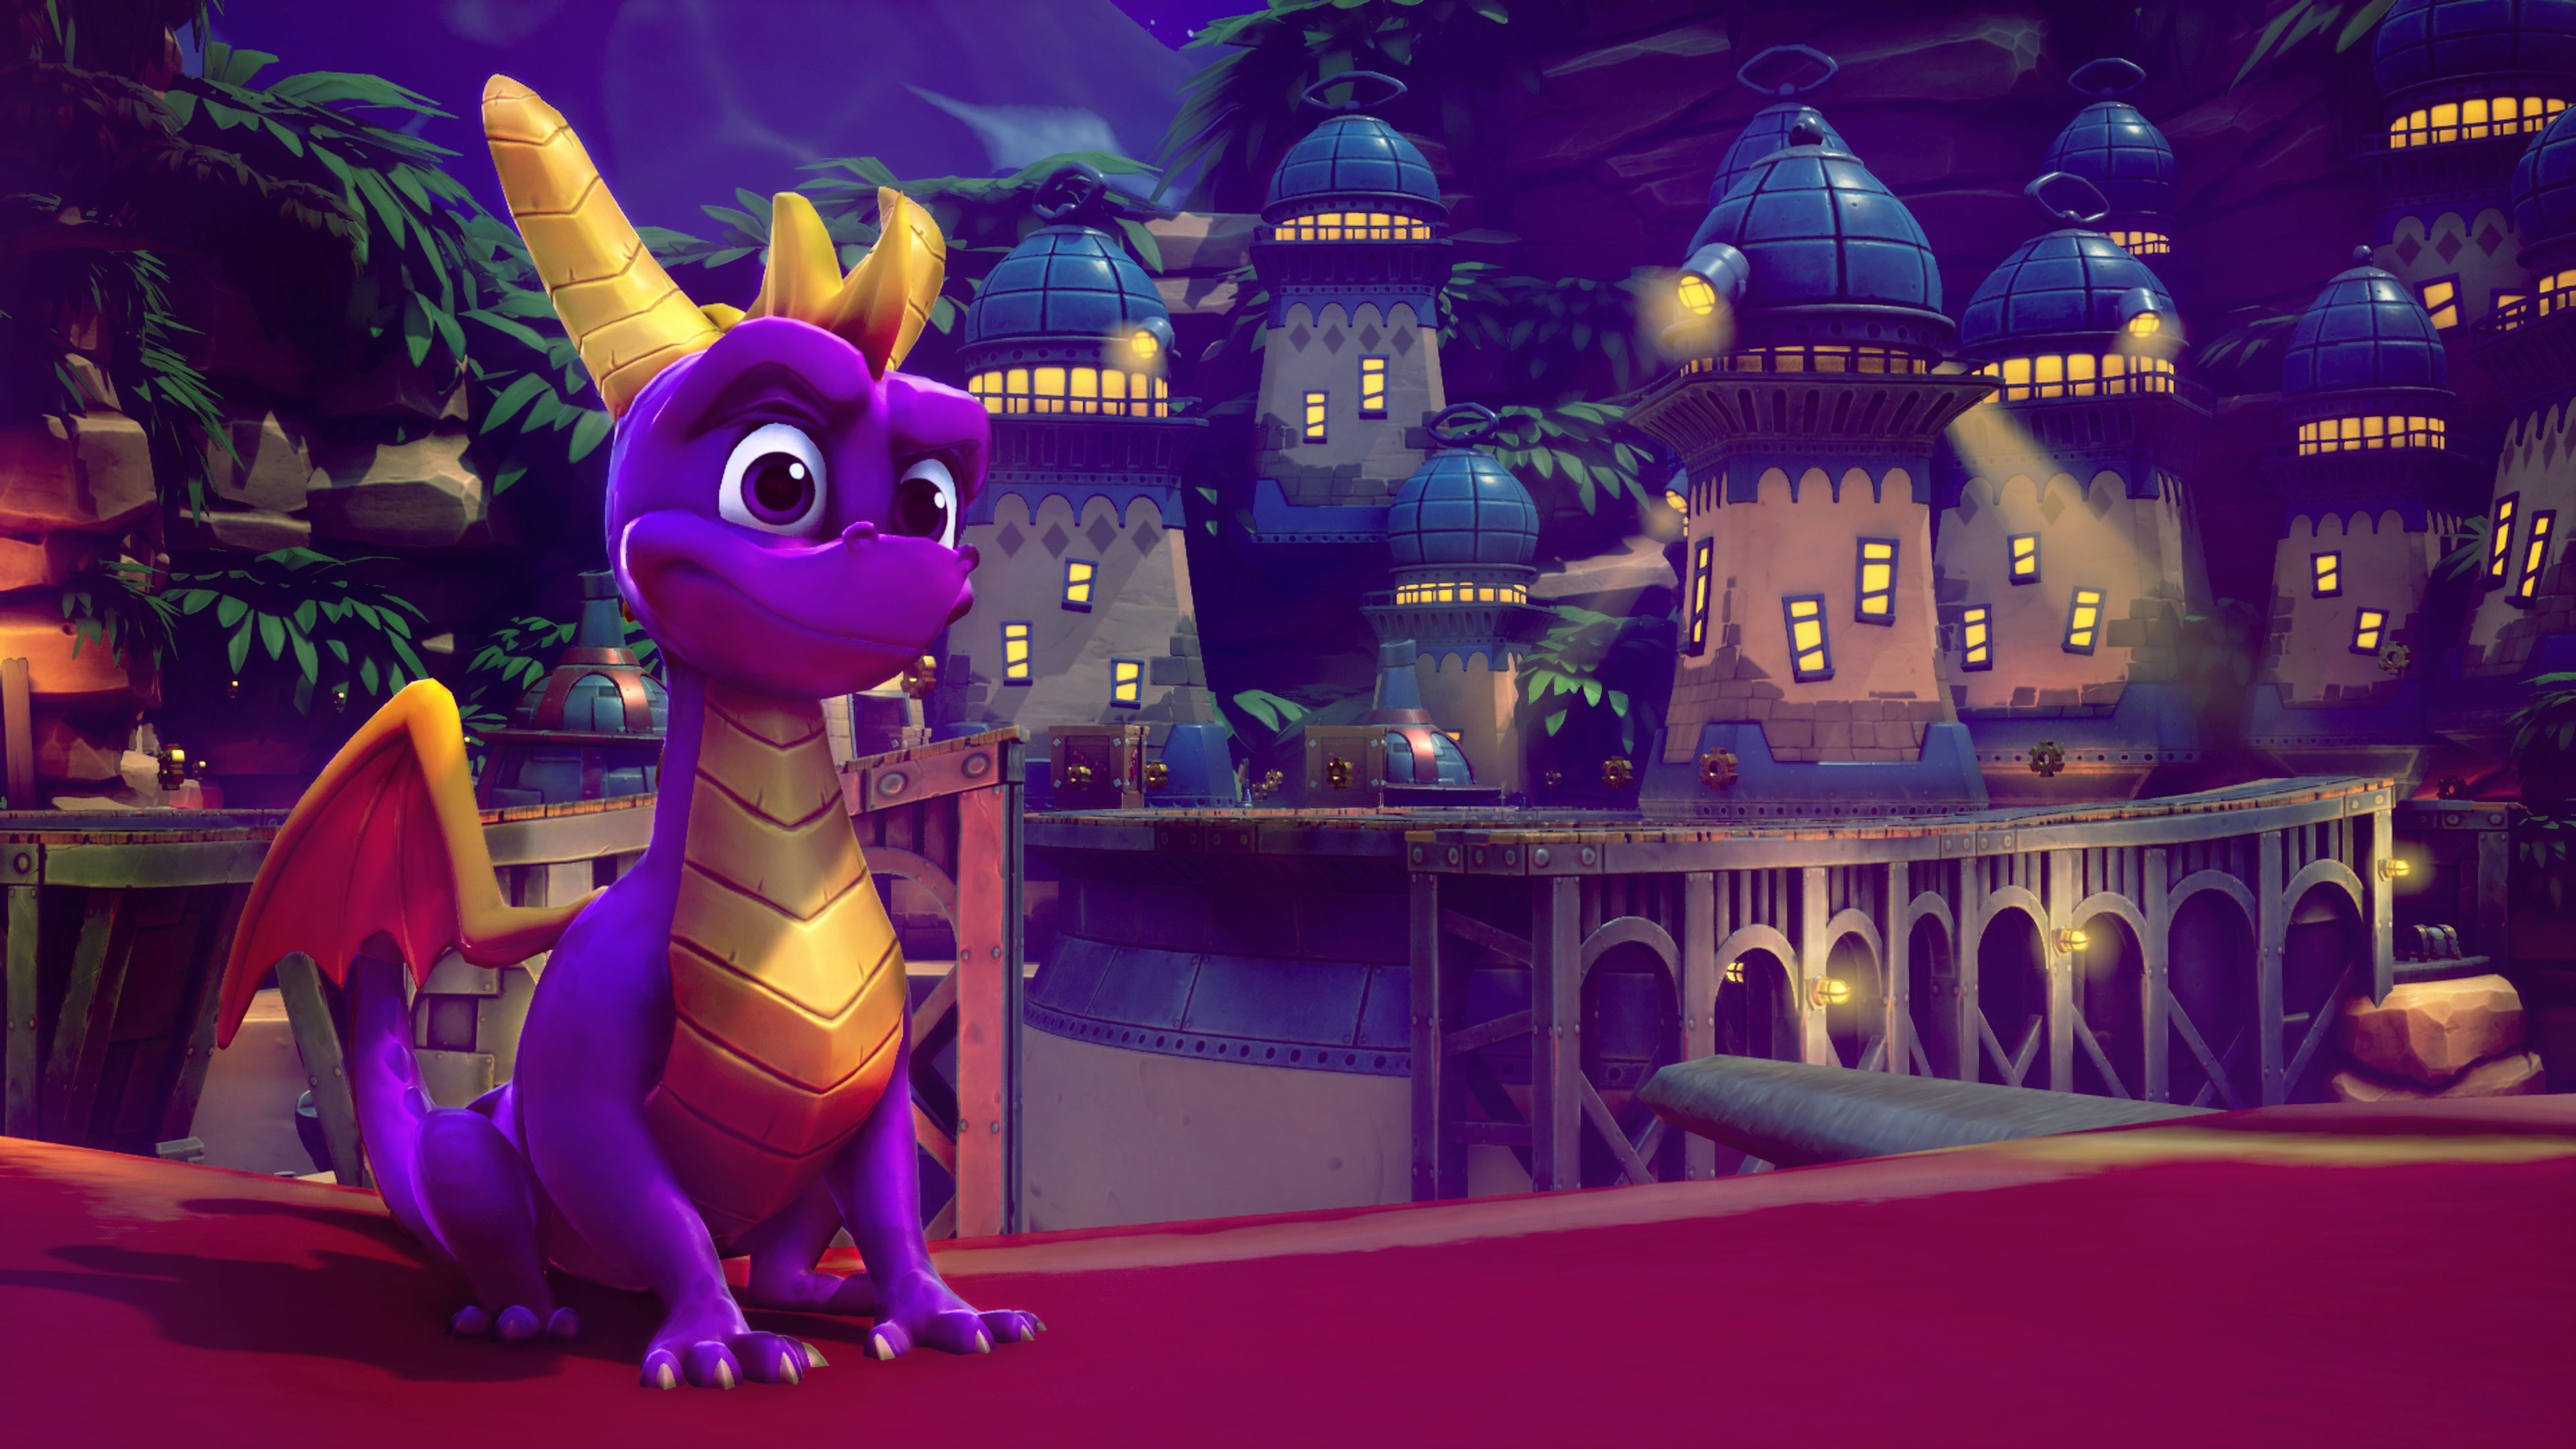 3840x2160 60+ Spyro the Dragon HD Wallpapers and Backgrounds